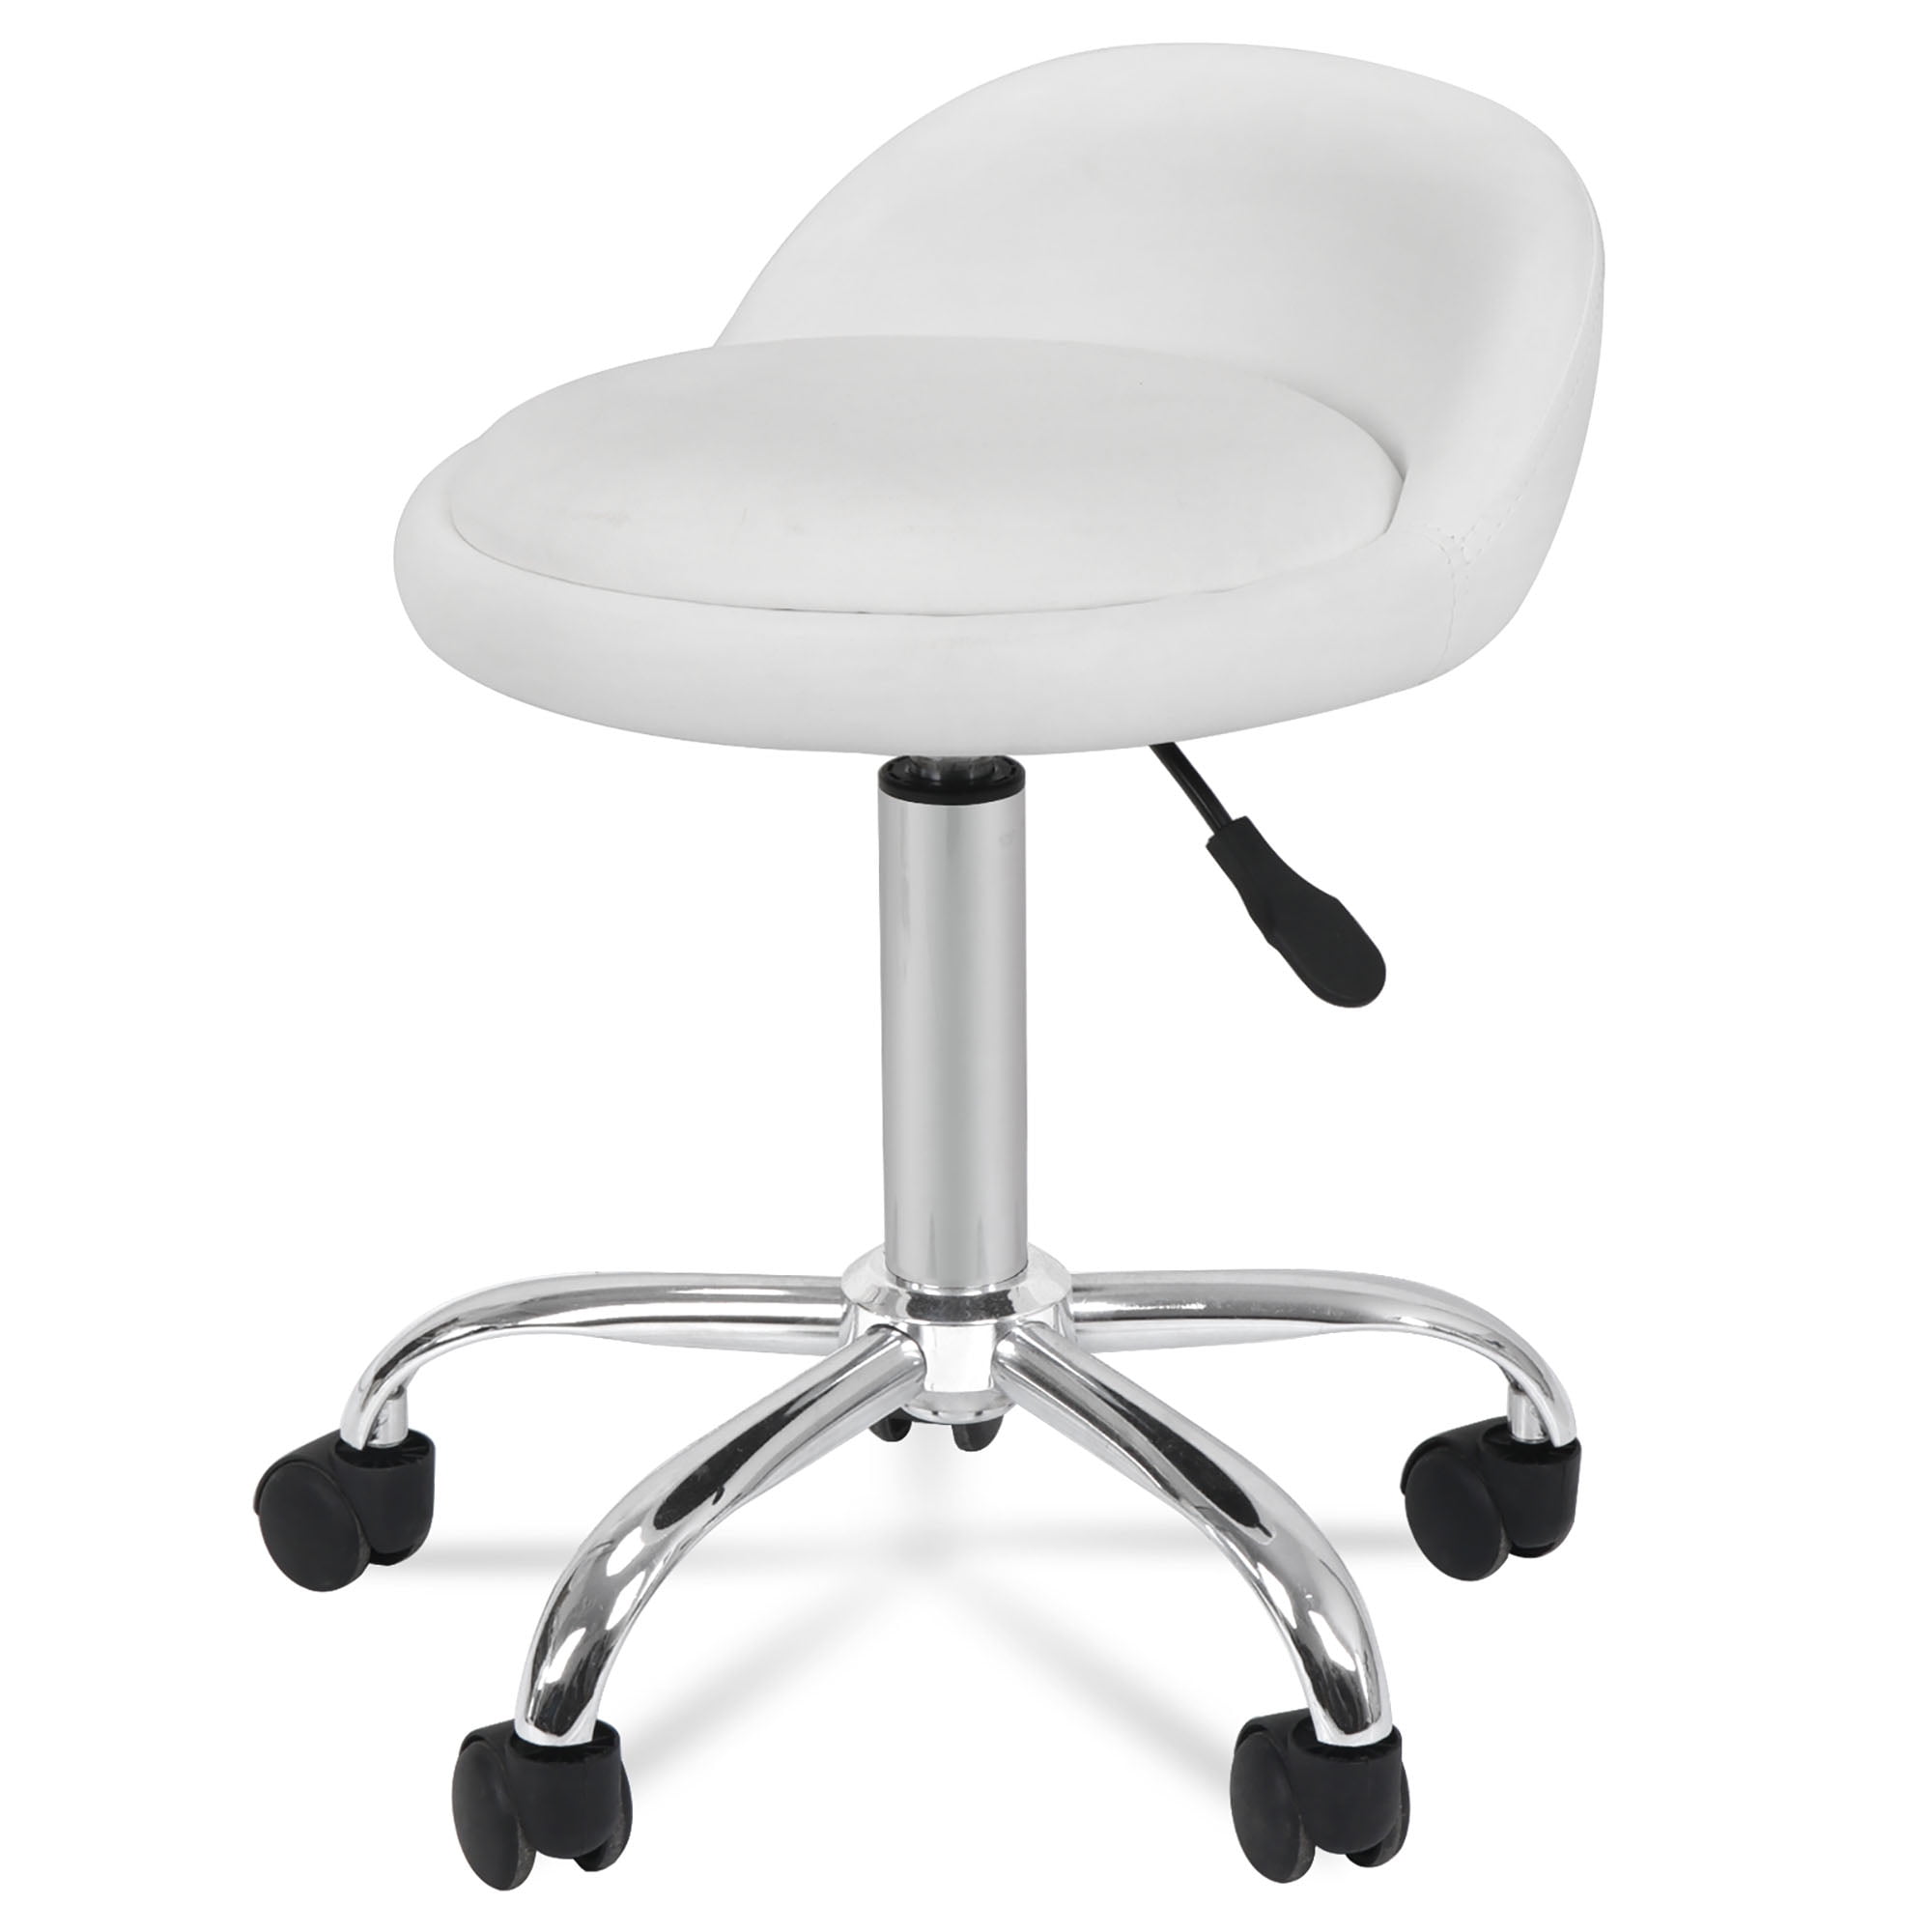 Round Rolling Stool workshop stool office stool with Back PU Leather Height Adjustable Swivel SPA Salon Stools Chair with Wheels